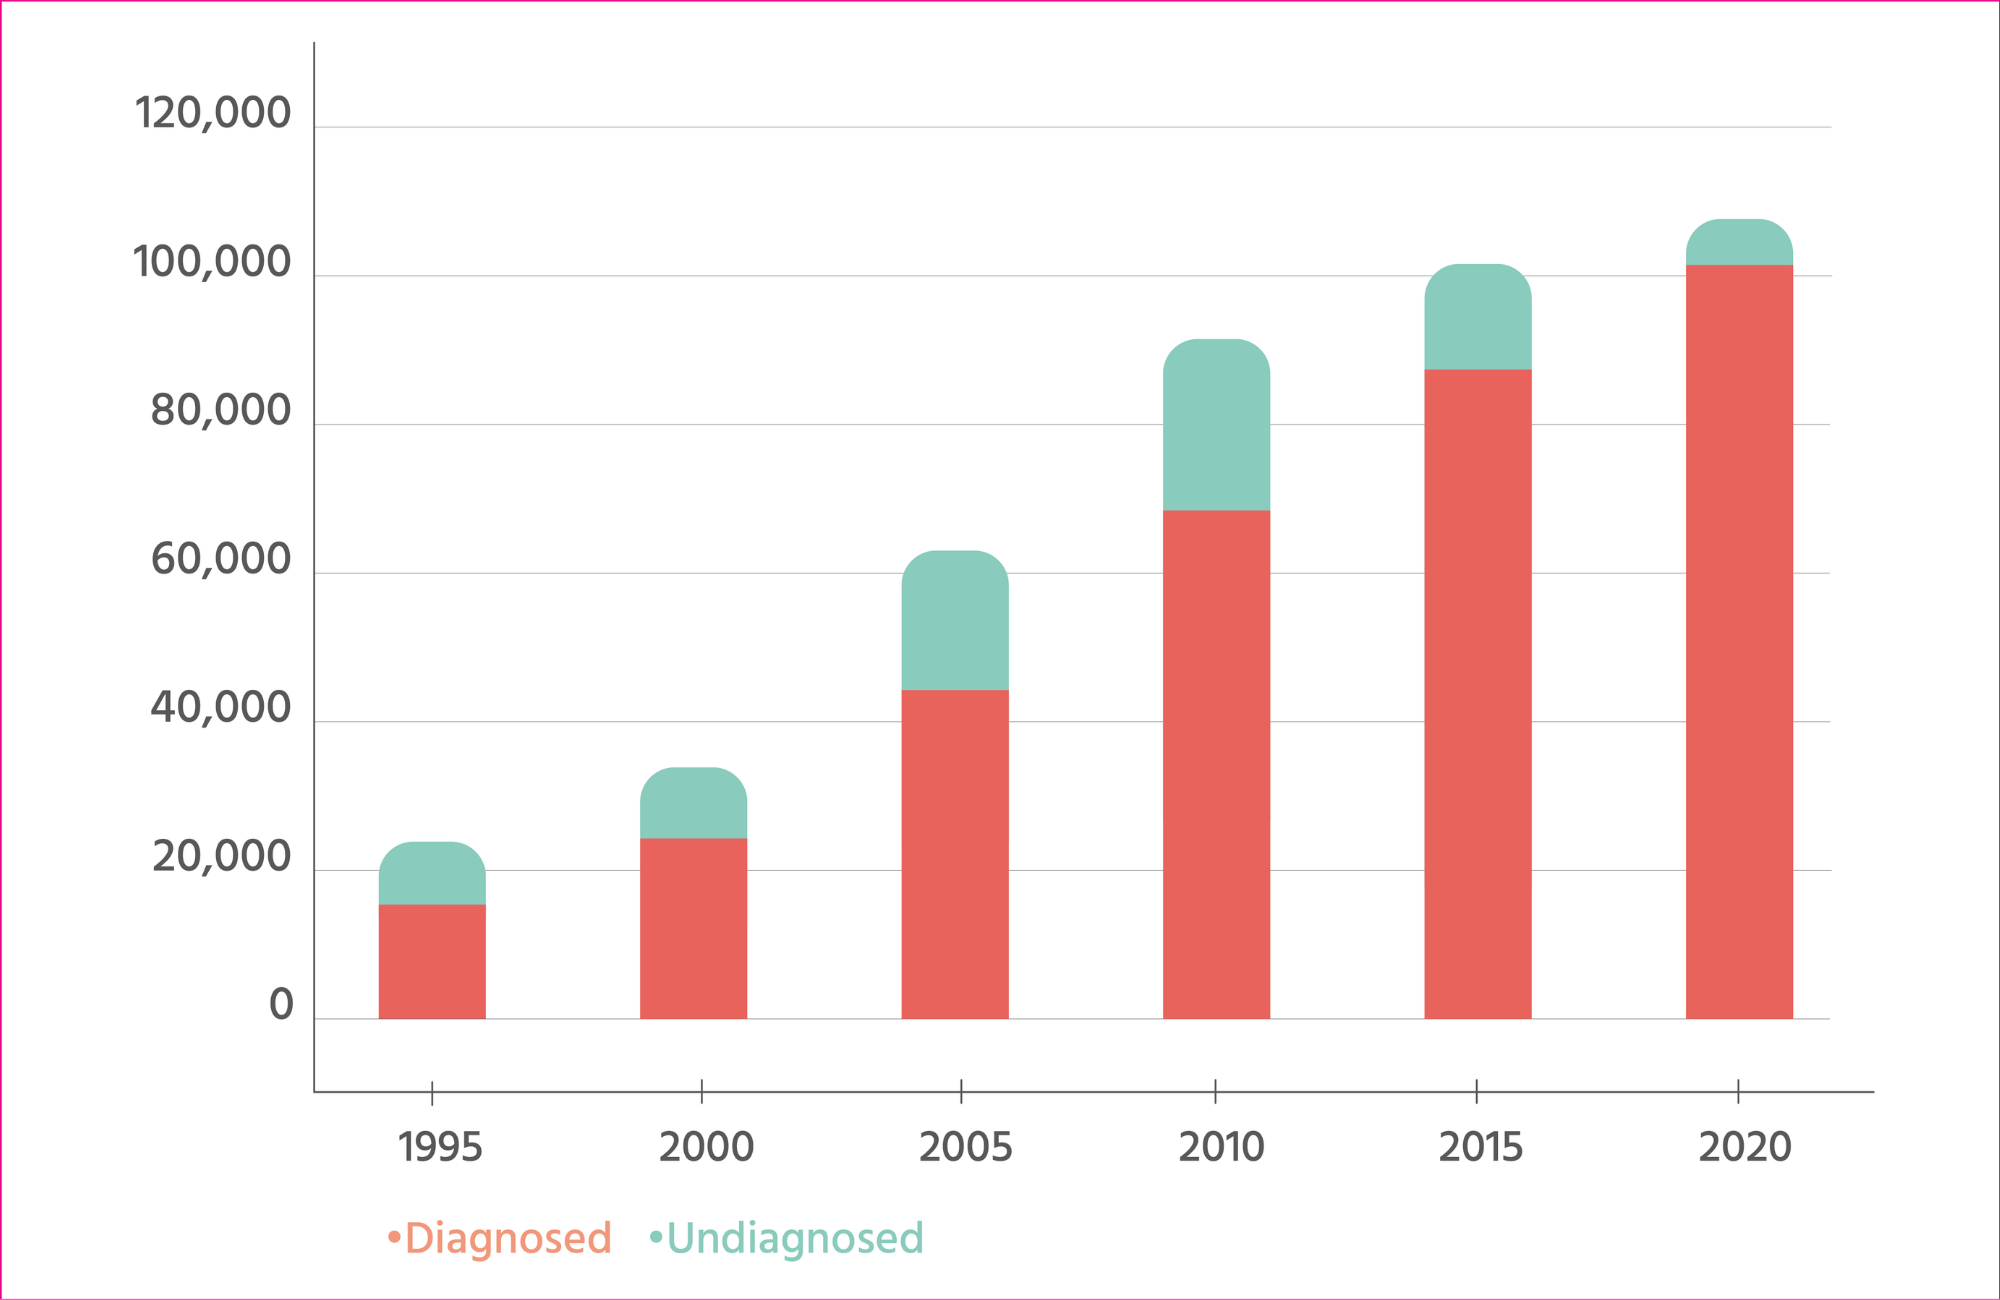 Estimated number of people living with HIV in the UK, diagnosed and undiagnosed